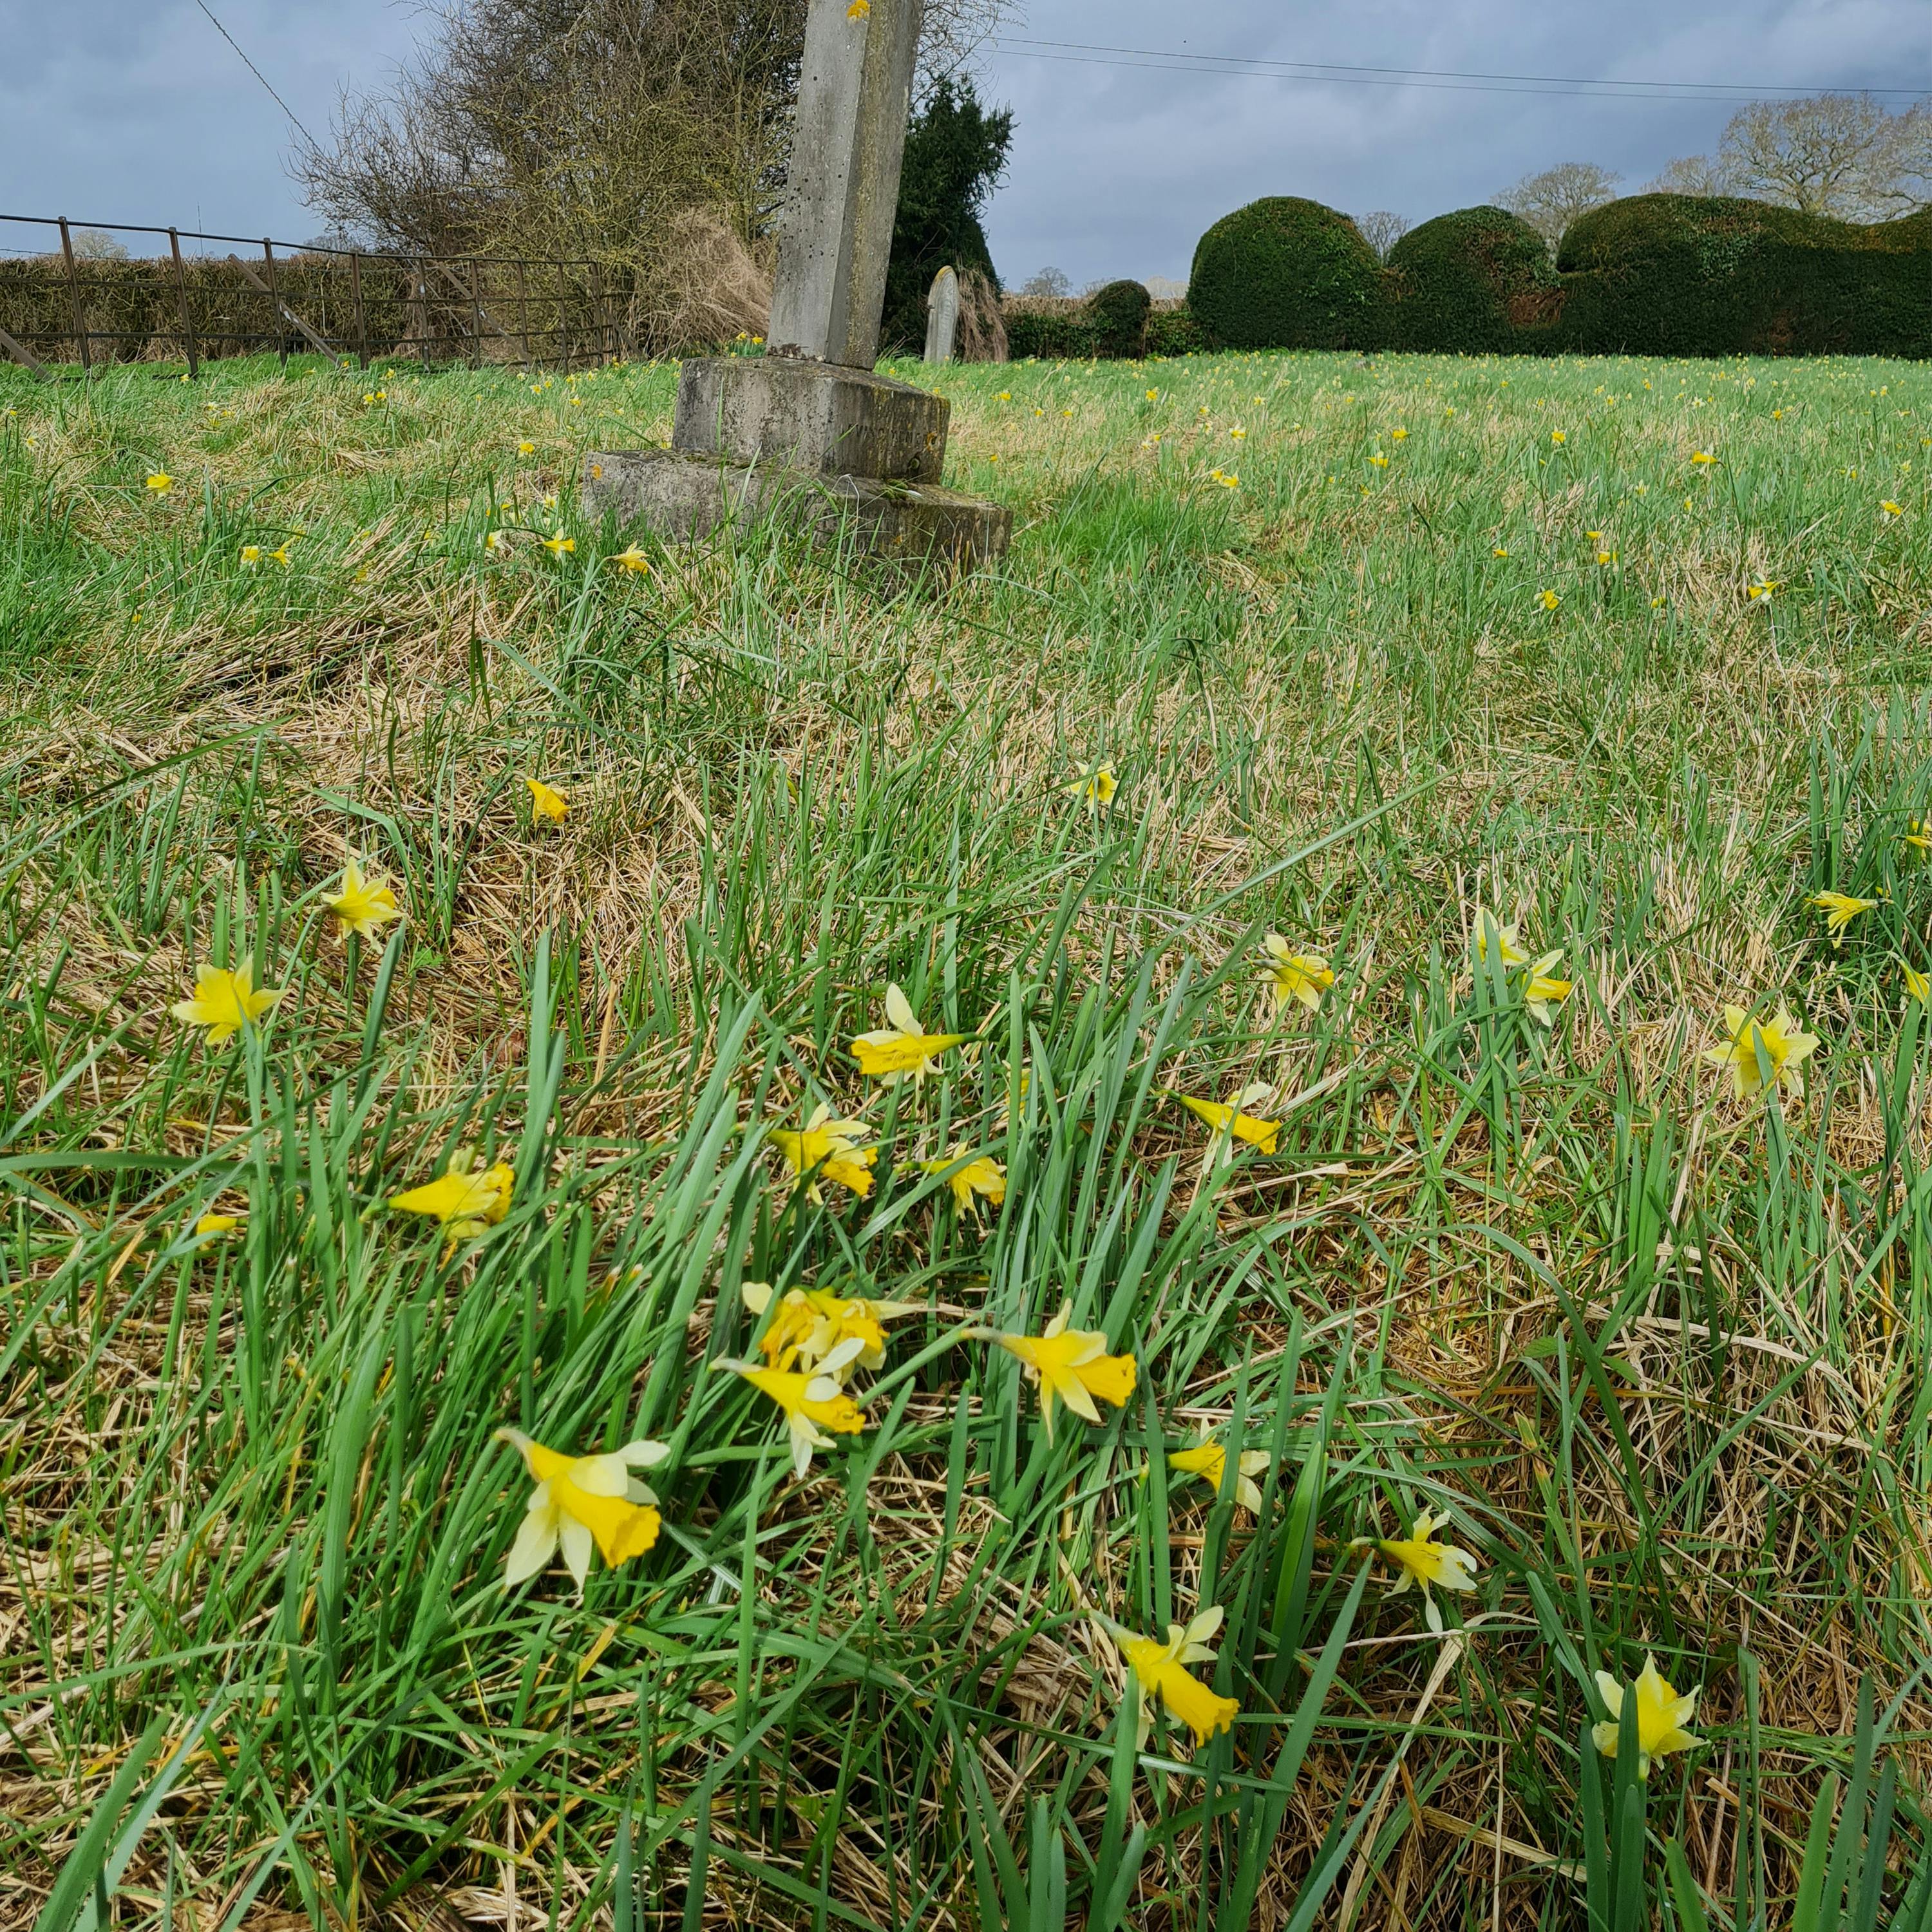 244. Enter the Golden Triangle in search of magical wild daffodils